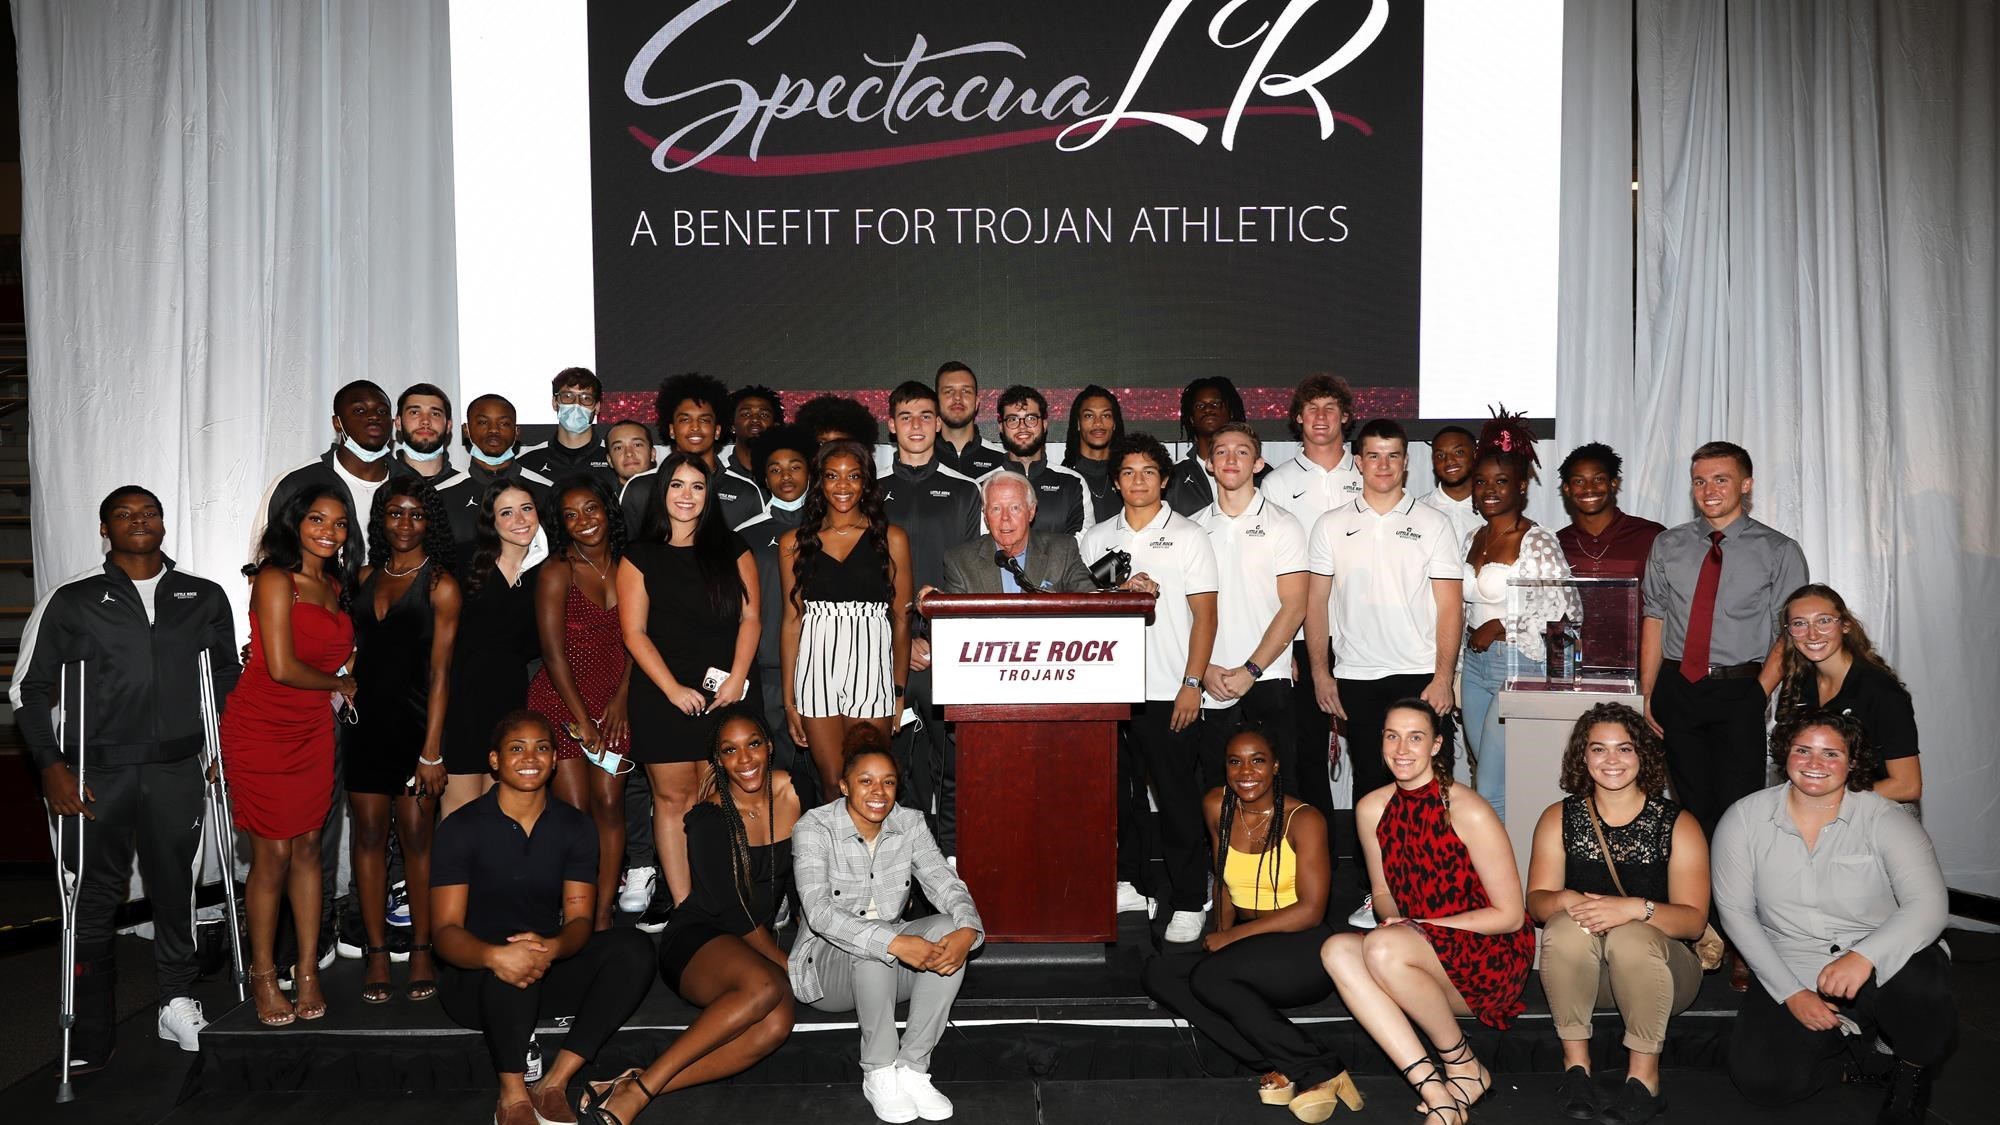 UA Little Rock celebrates student-athletes during the SpectacuaLR fundraiser for Little Rock Athletics on Oct. 7.